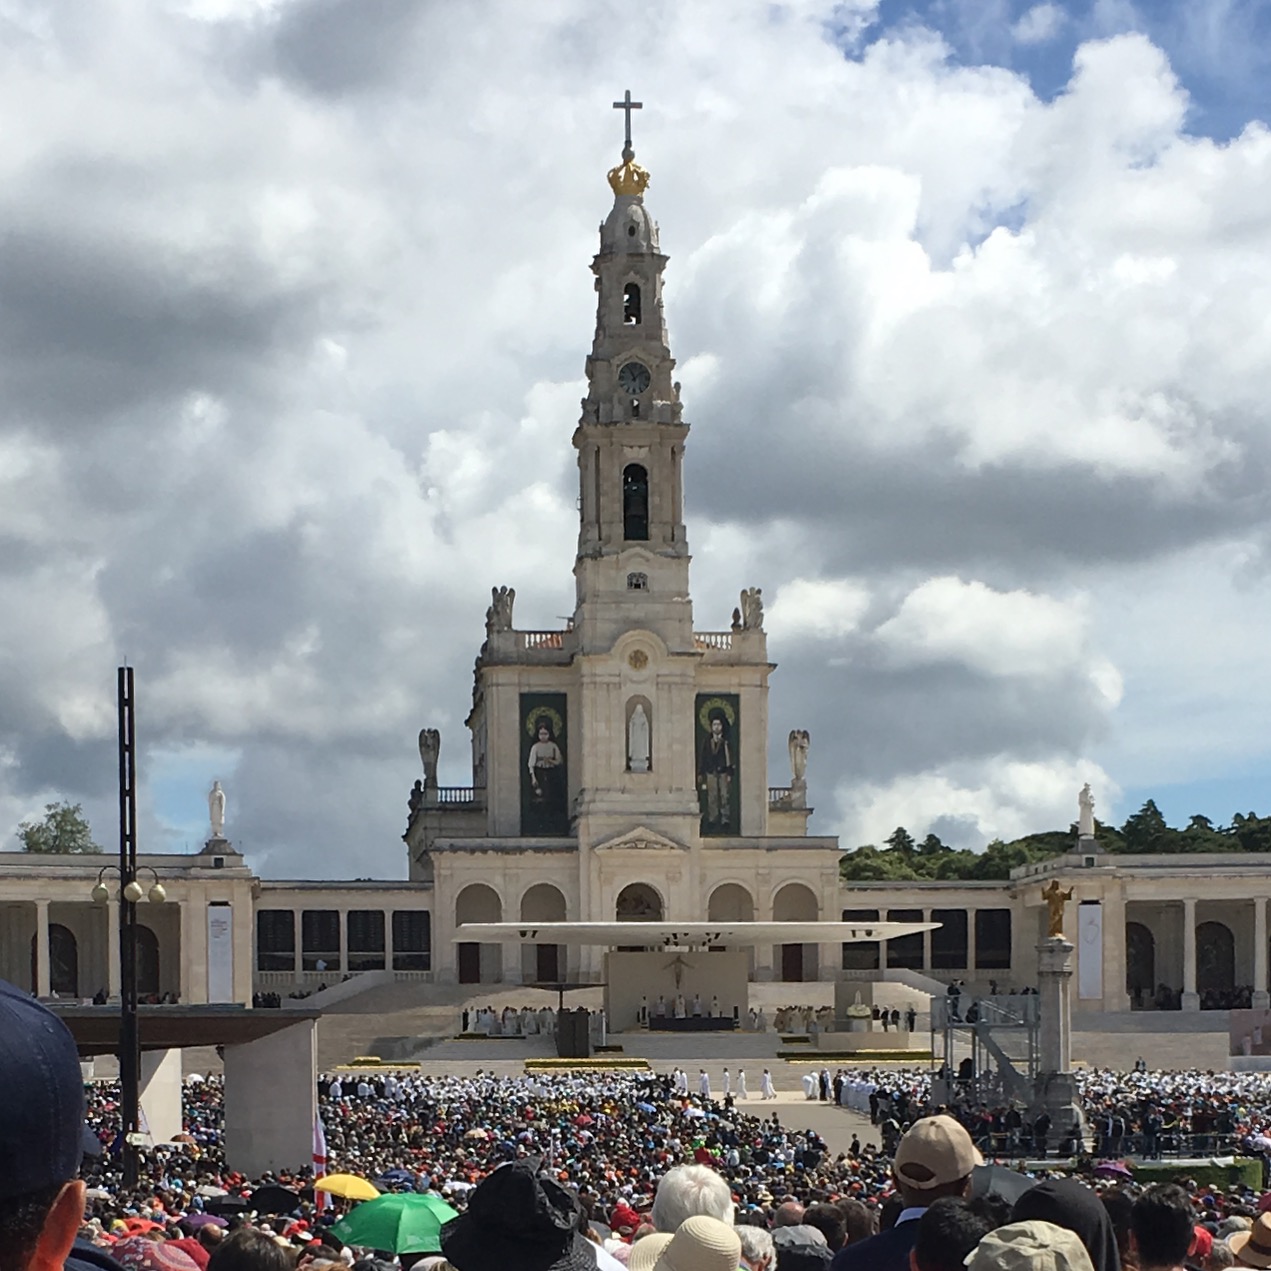 The Basilica of Our Lady of the Rosary at Fatima. This photograph shows it along with some of the 1 million pilgrims in attendance on May 13, 2017